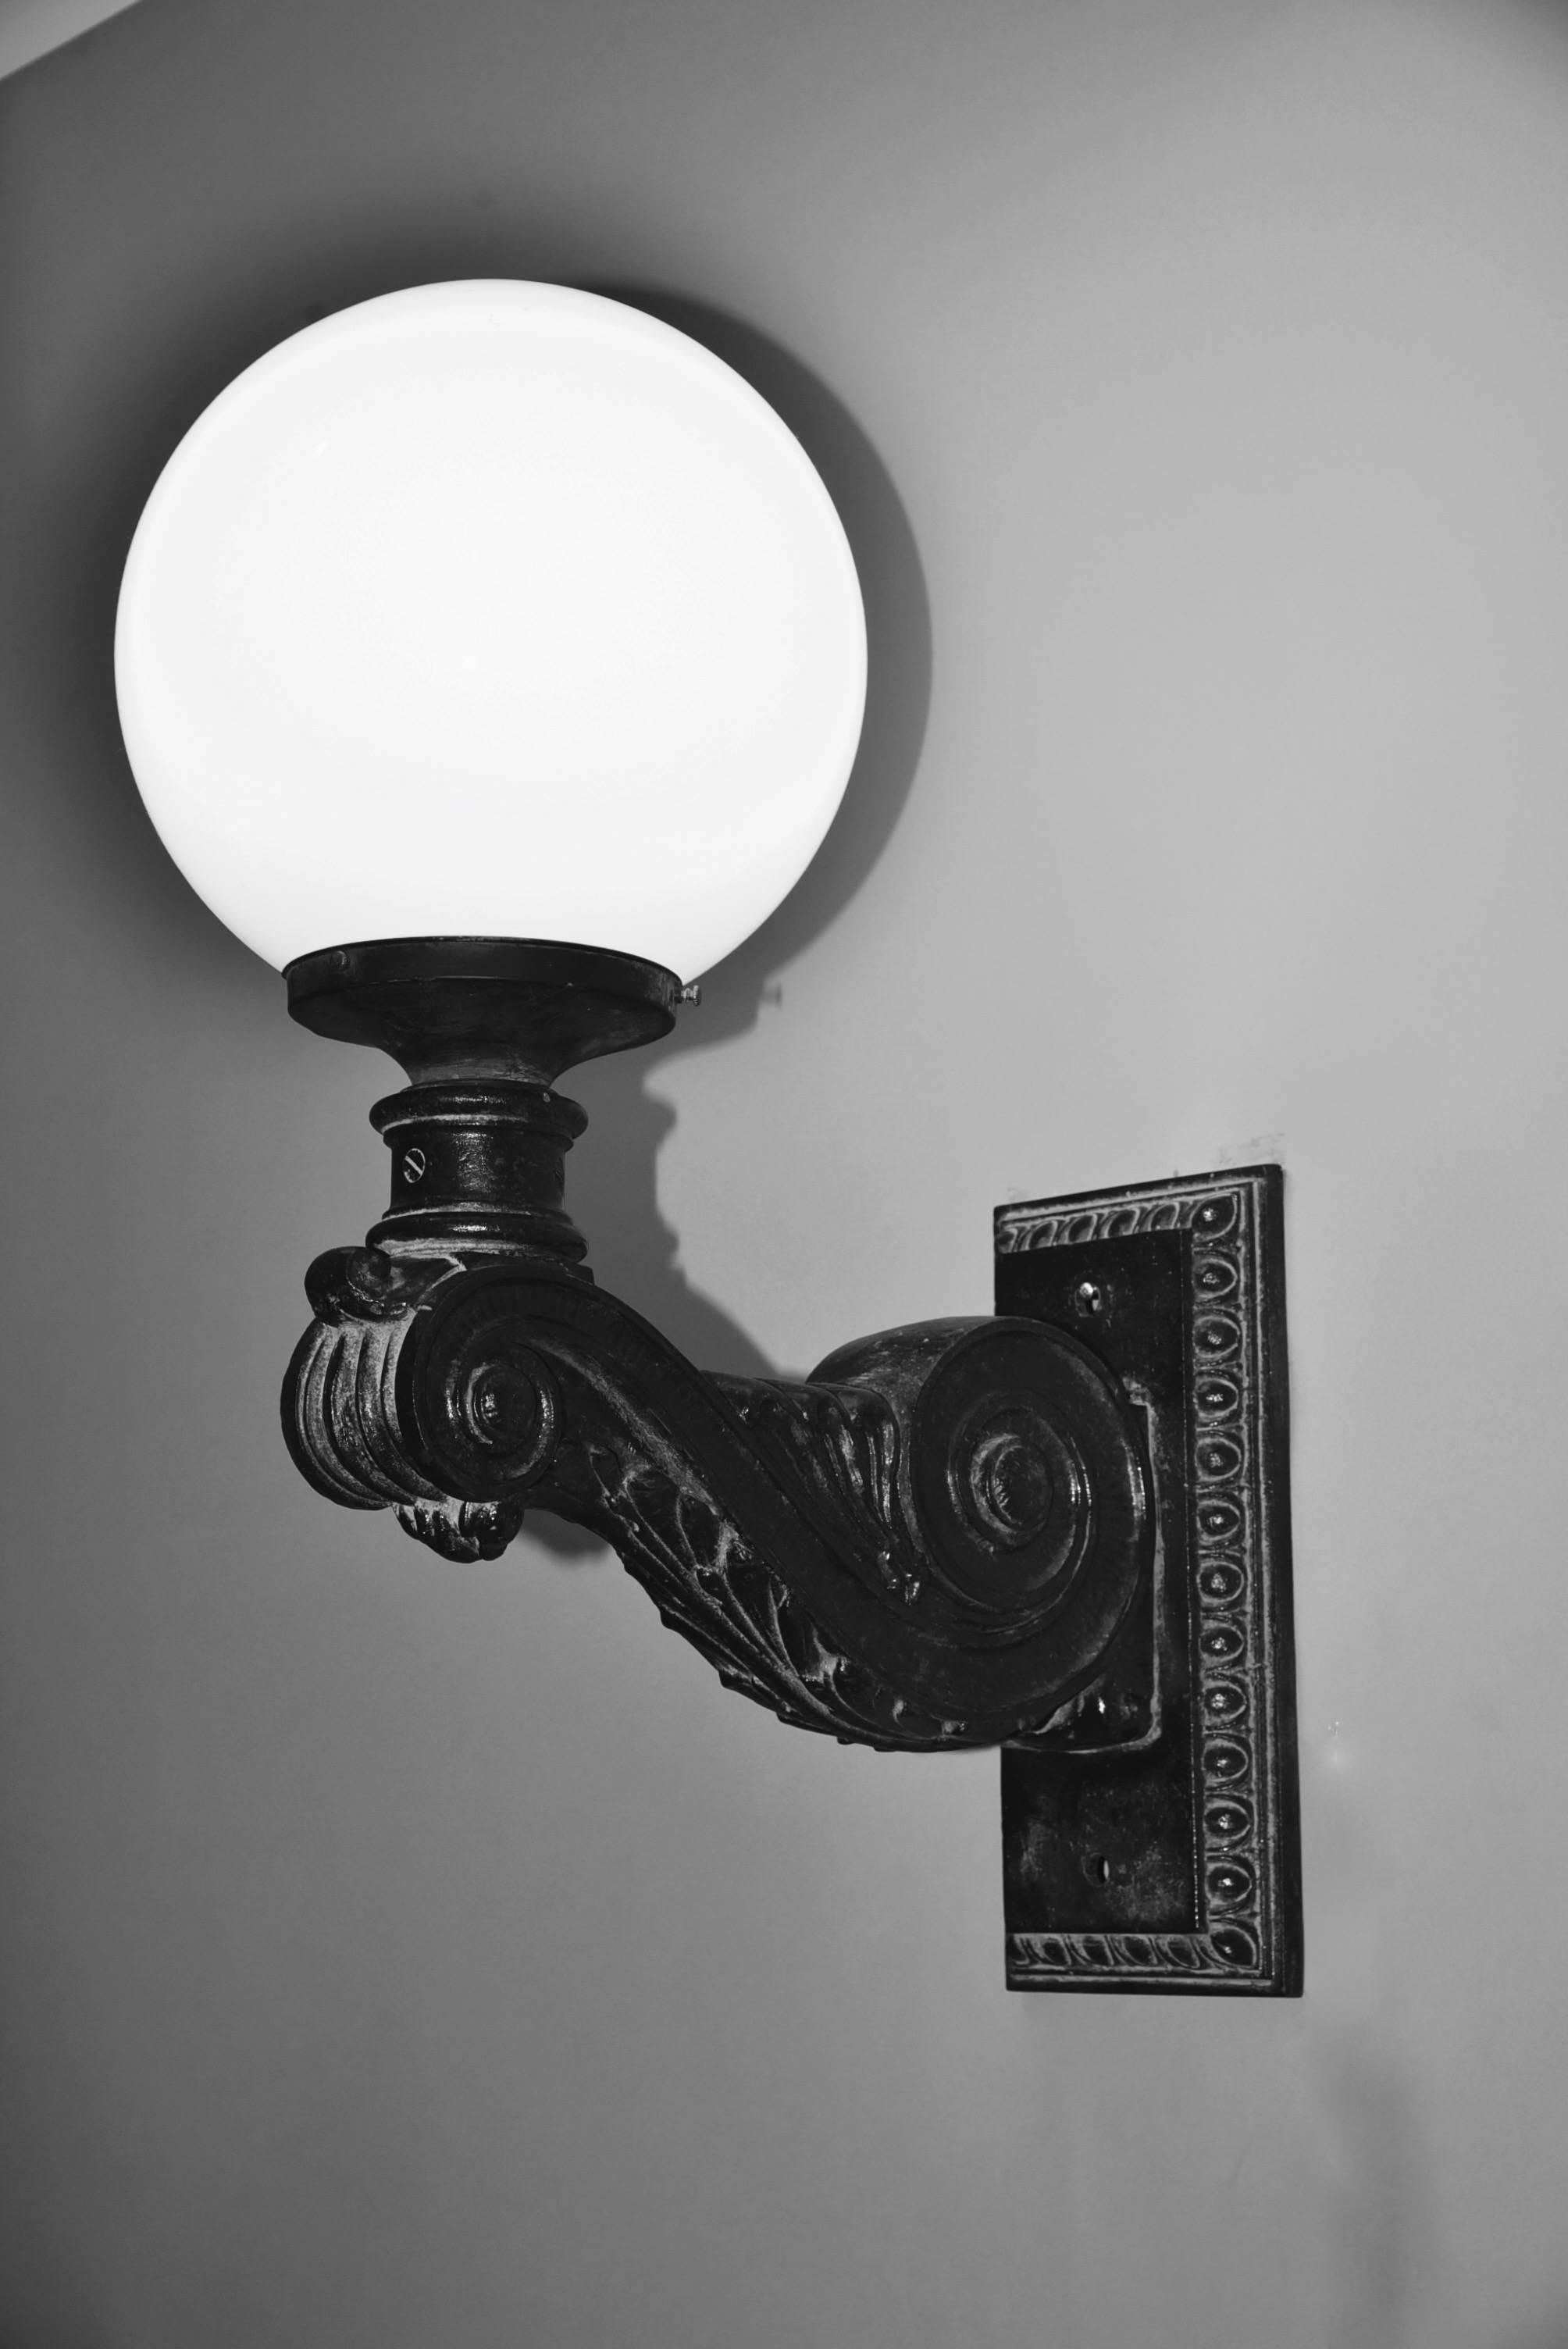 This is a rare pair of large heavy industrial black cast iron wall-mounted lamps or sconces for outdoors from the 1920's. Black cast iron rectangular egg-and dart bordered back plate issuing scrolled acanthus leaf detail arm supporting a globe opal